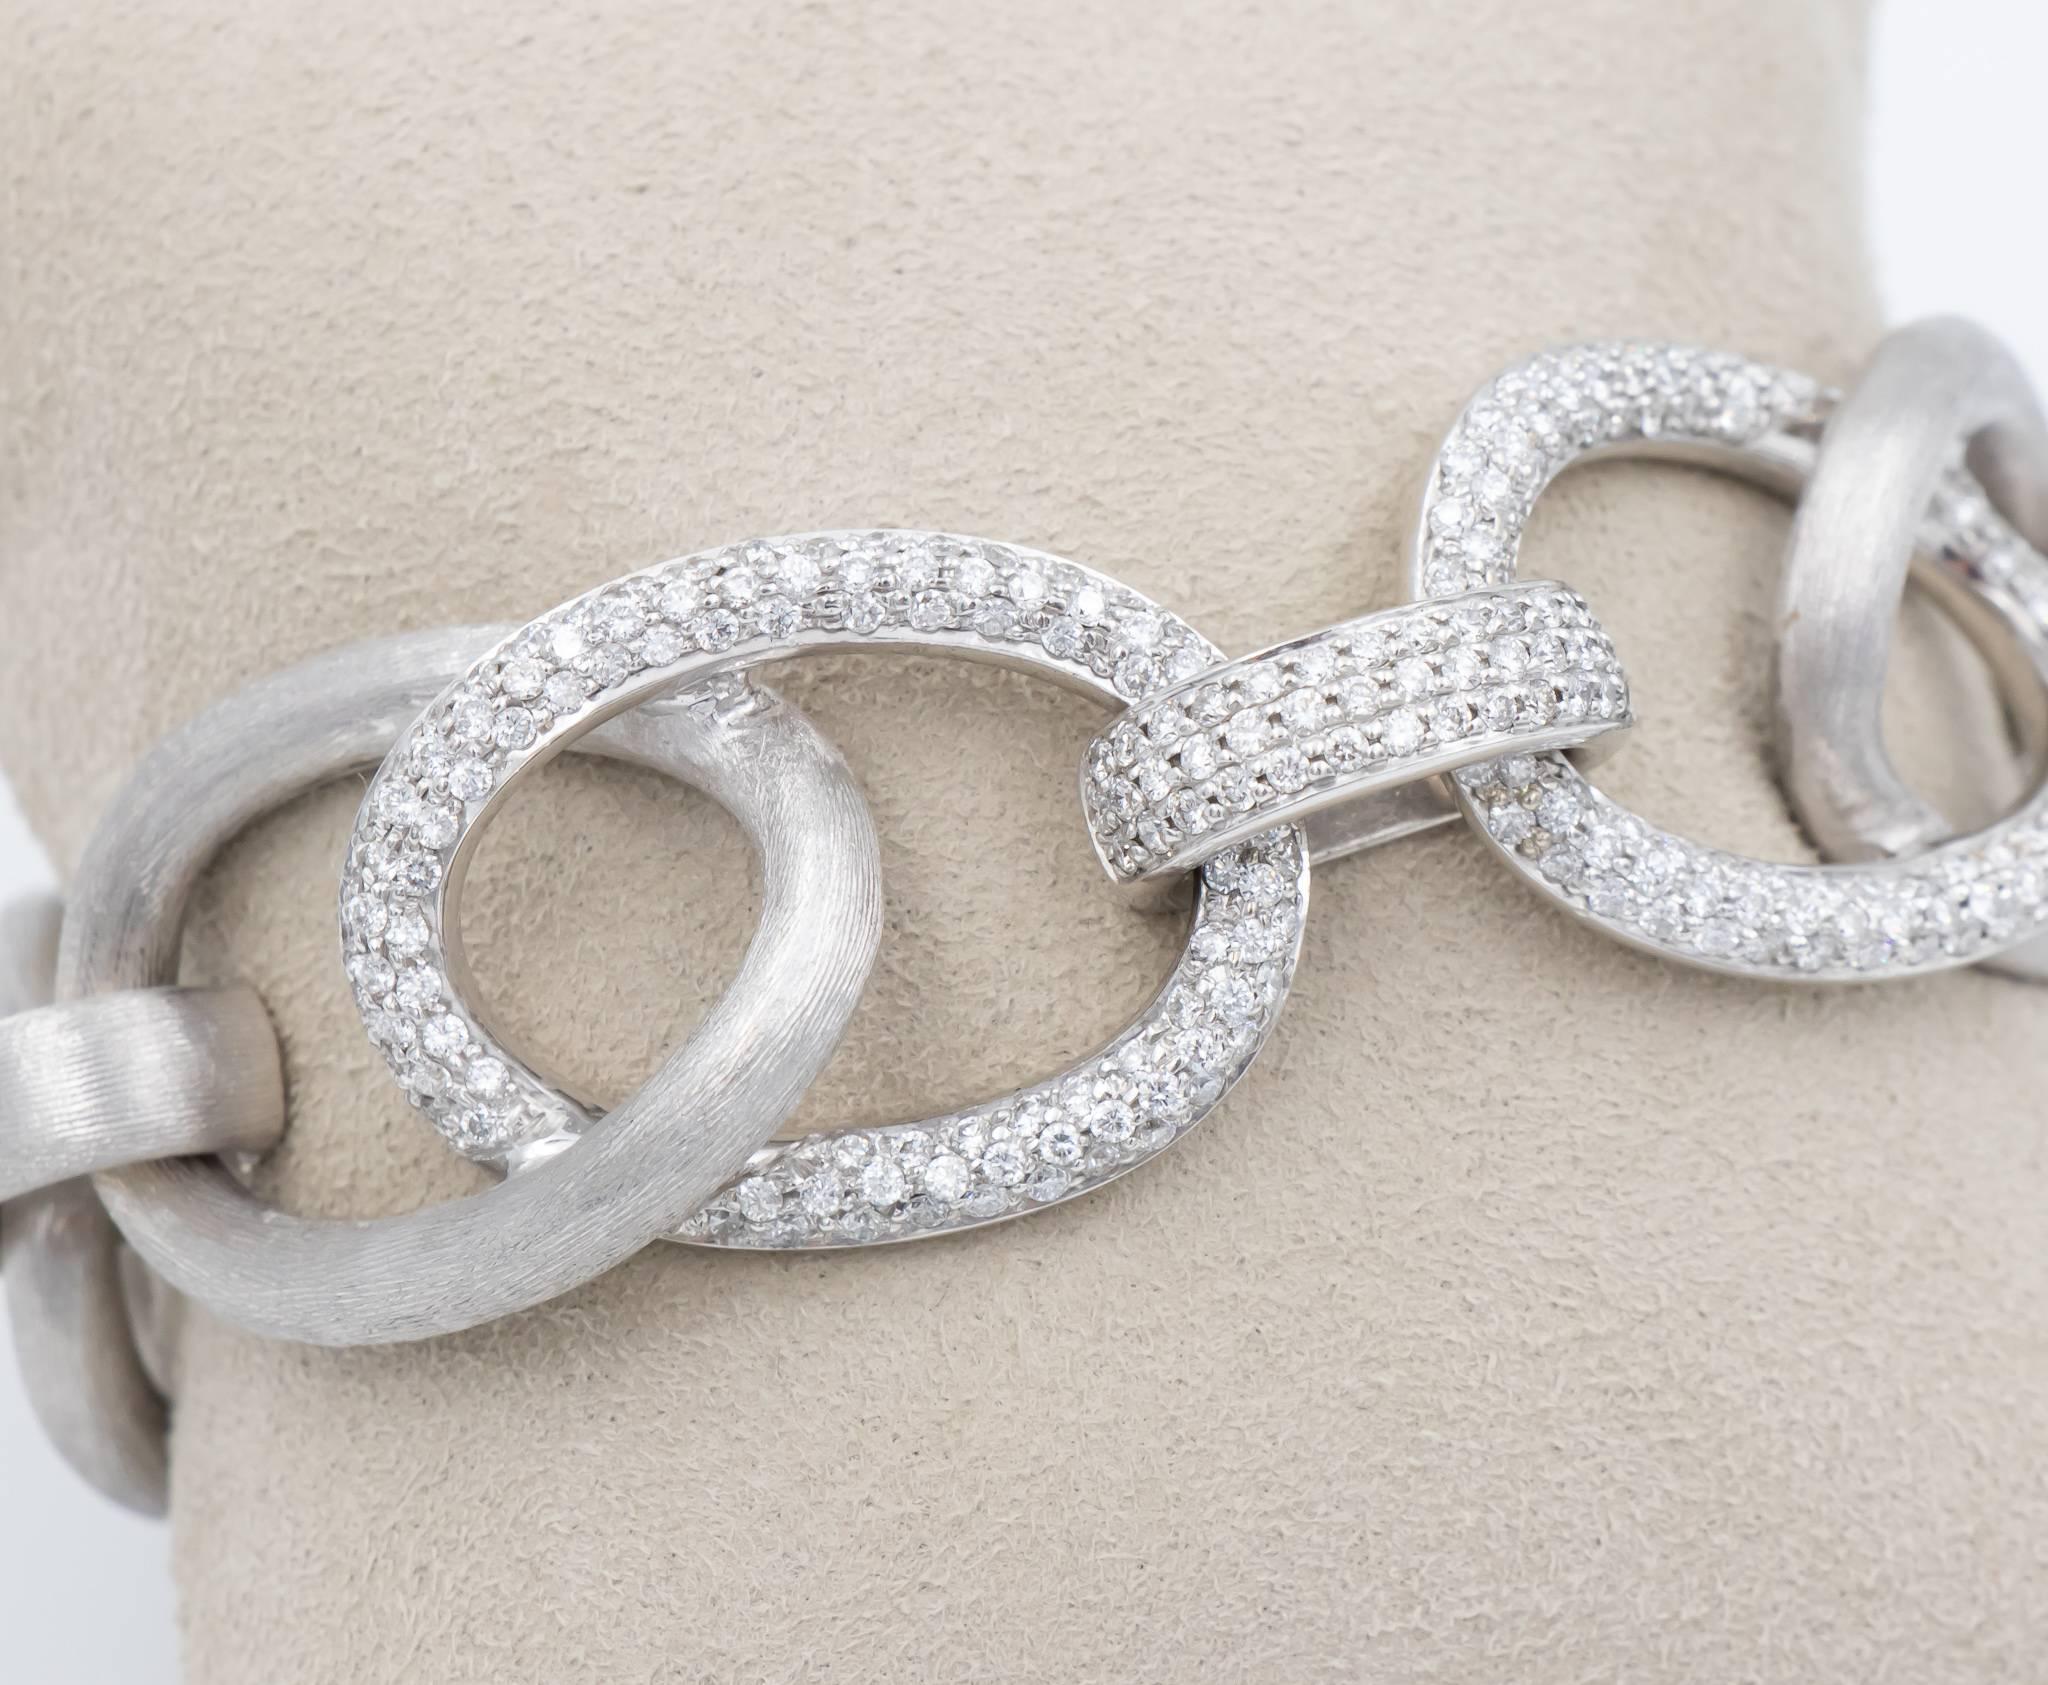 This link bracelet showpiece has a large link style with approximately 3.00 carats of high quality round brilliant diamonds.  The diamonds are pave set on three of the stations.  This is a finely made bracelet in 18k white gold with a hand engraved